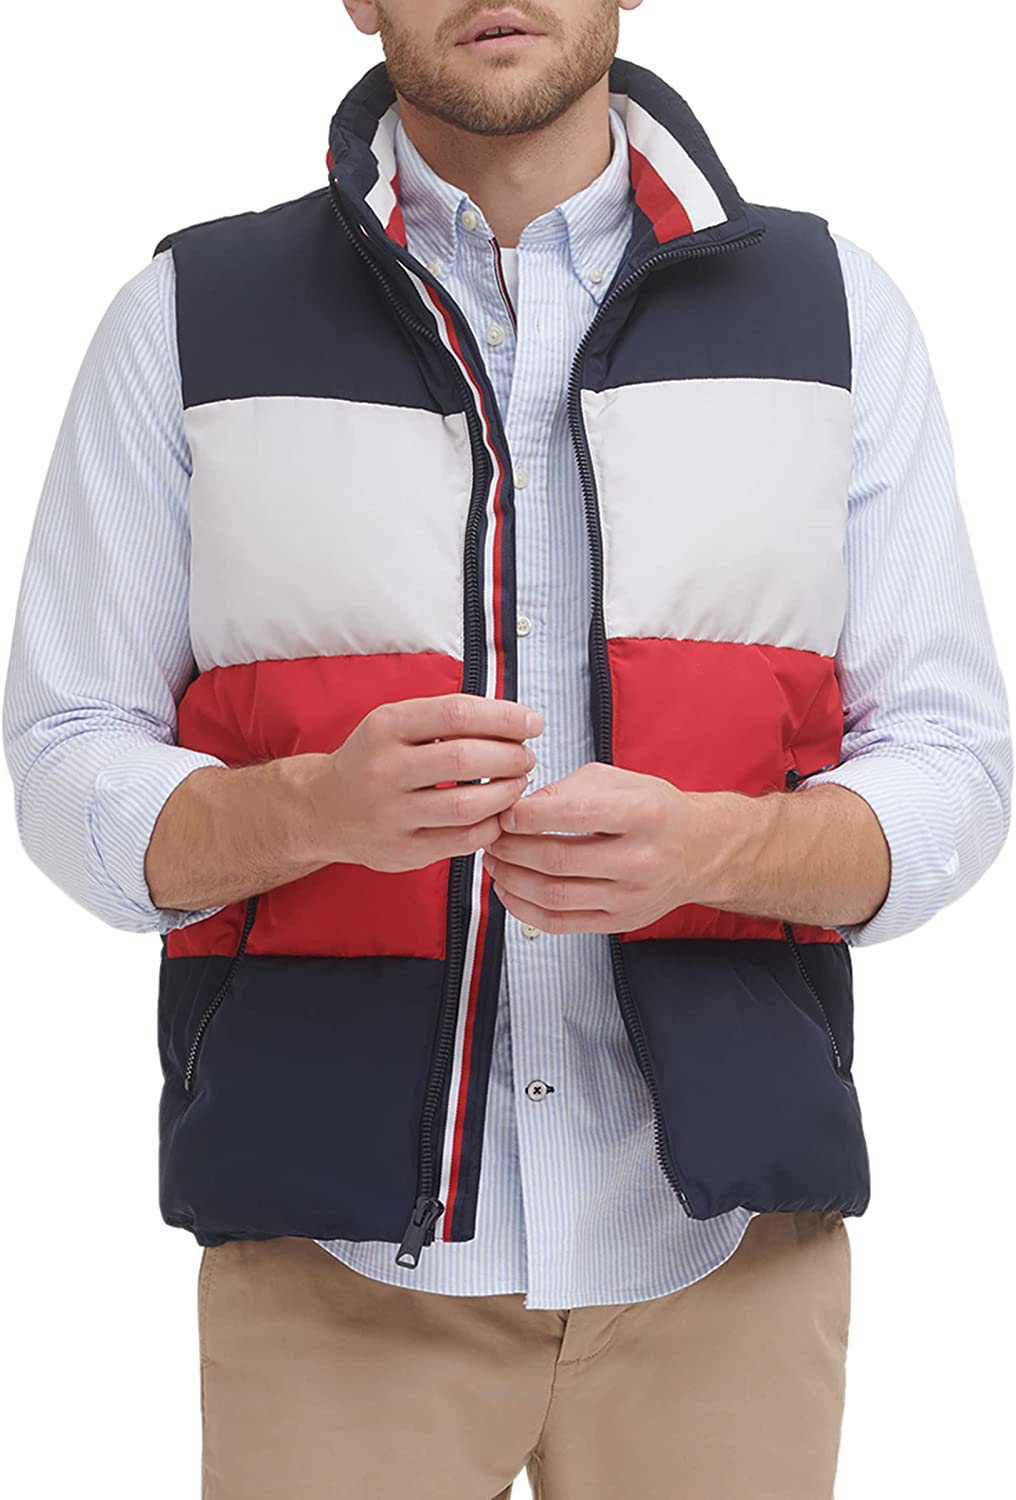 Tommy Hilfiger Men’s Quilted Stand Collar Vest, Midnight/Ice/Red, Large